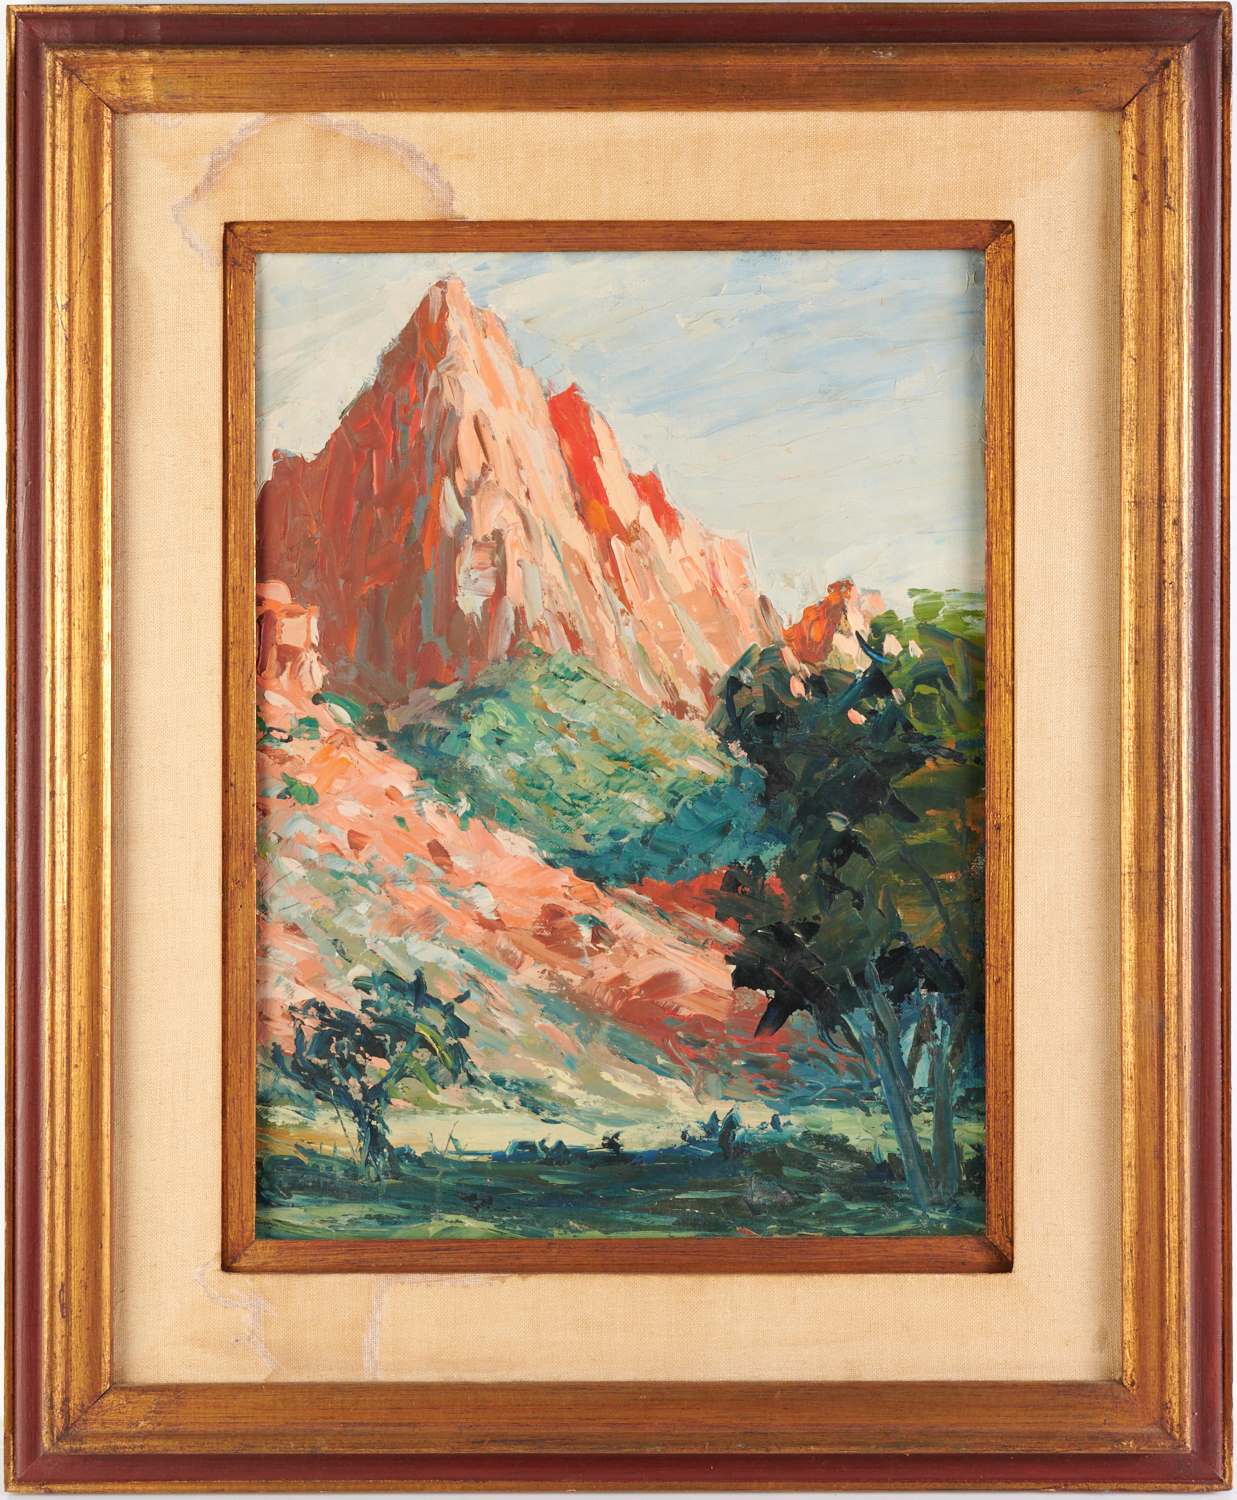 STEPHEN NAEGLE, ZION NATIONAL PARK PAINTING